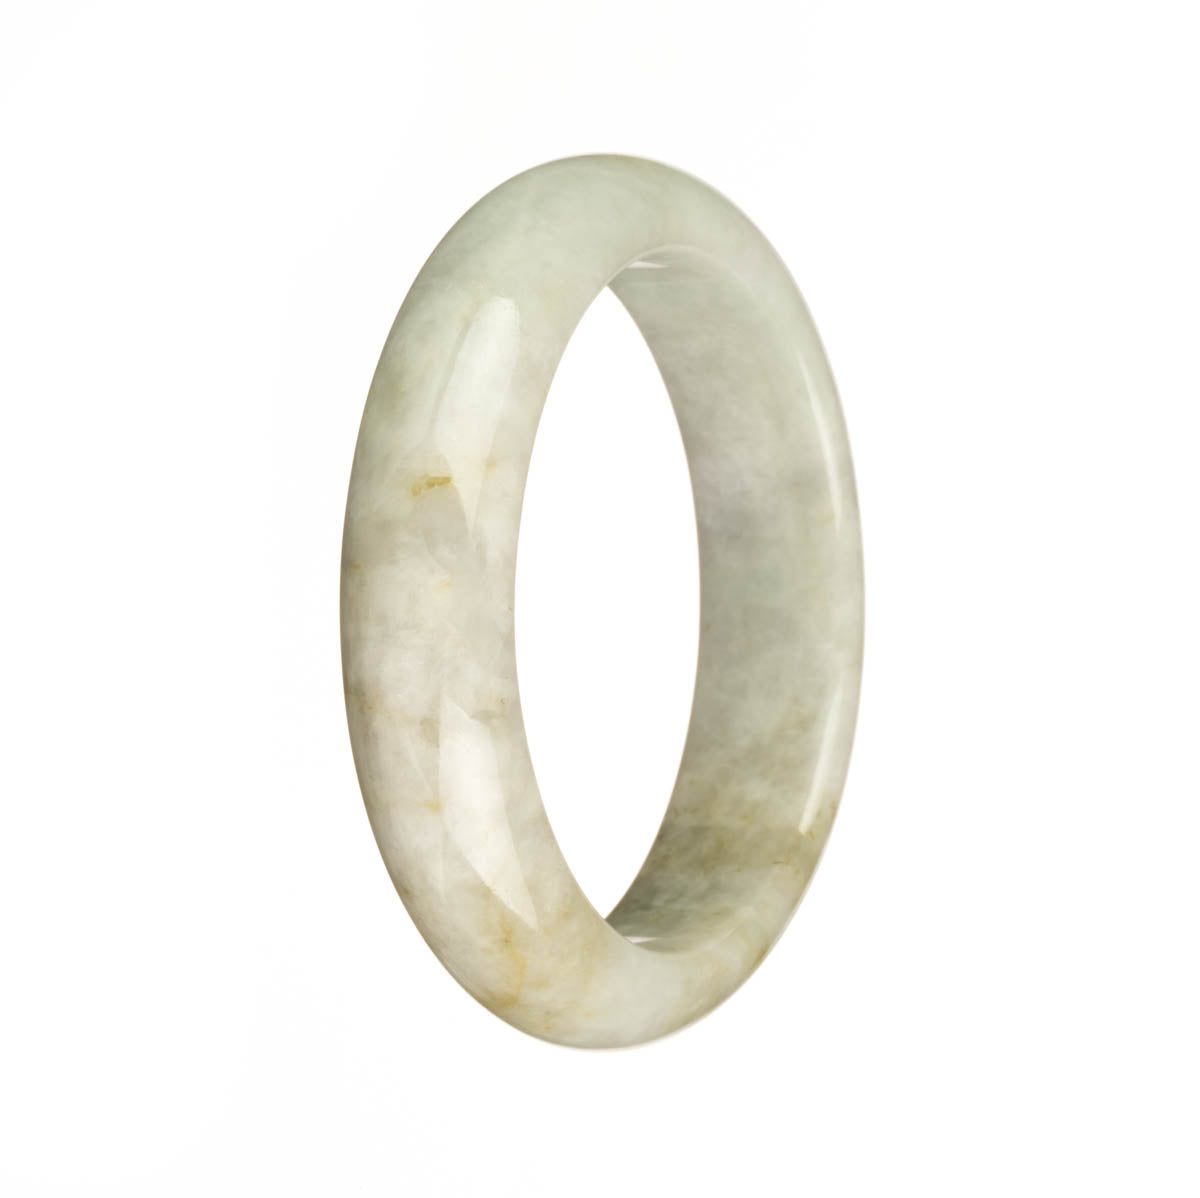 A beautiful and authentic Burma Jade bangle bracelet with a unique olive green pattern, crafted with Grade A quality. This 55mm half-moon shaped bracelet is a stunning piece from the MAYS collection.